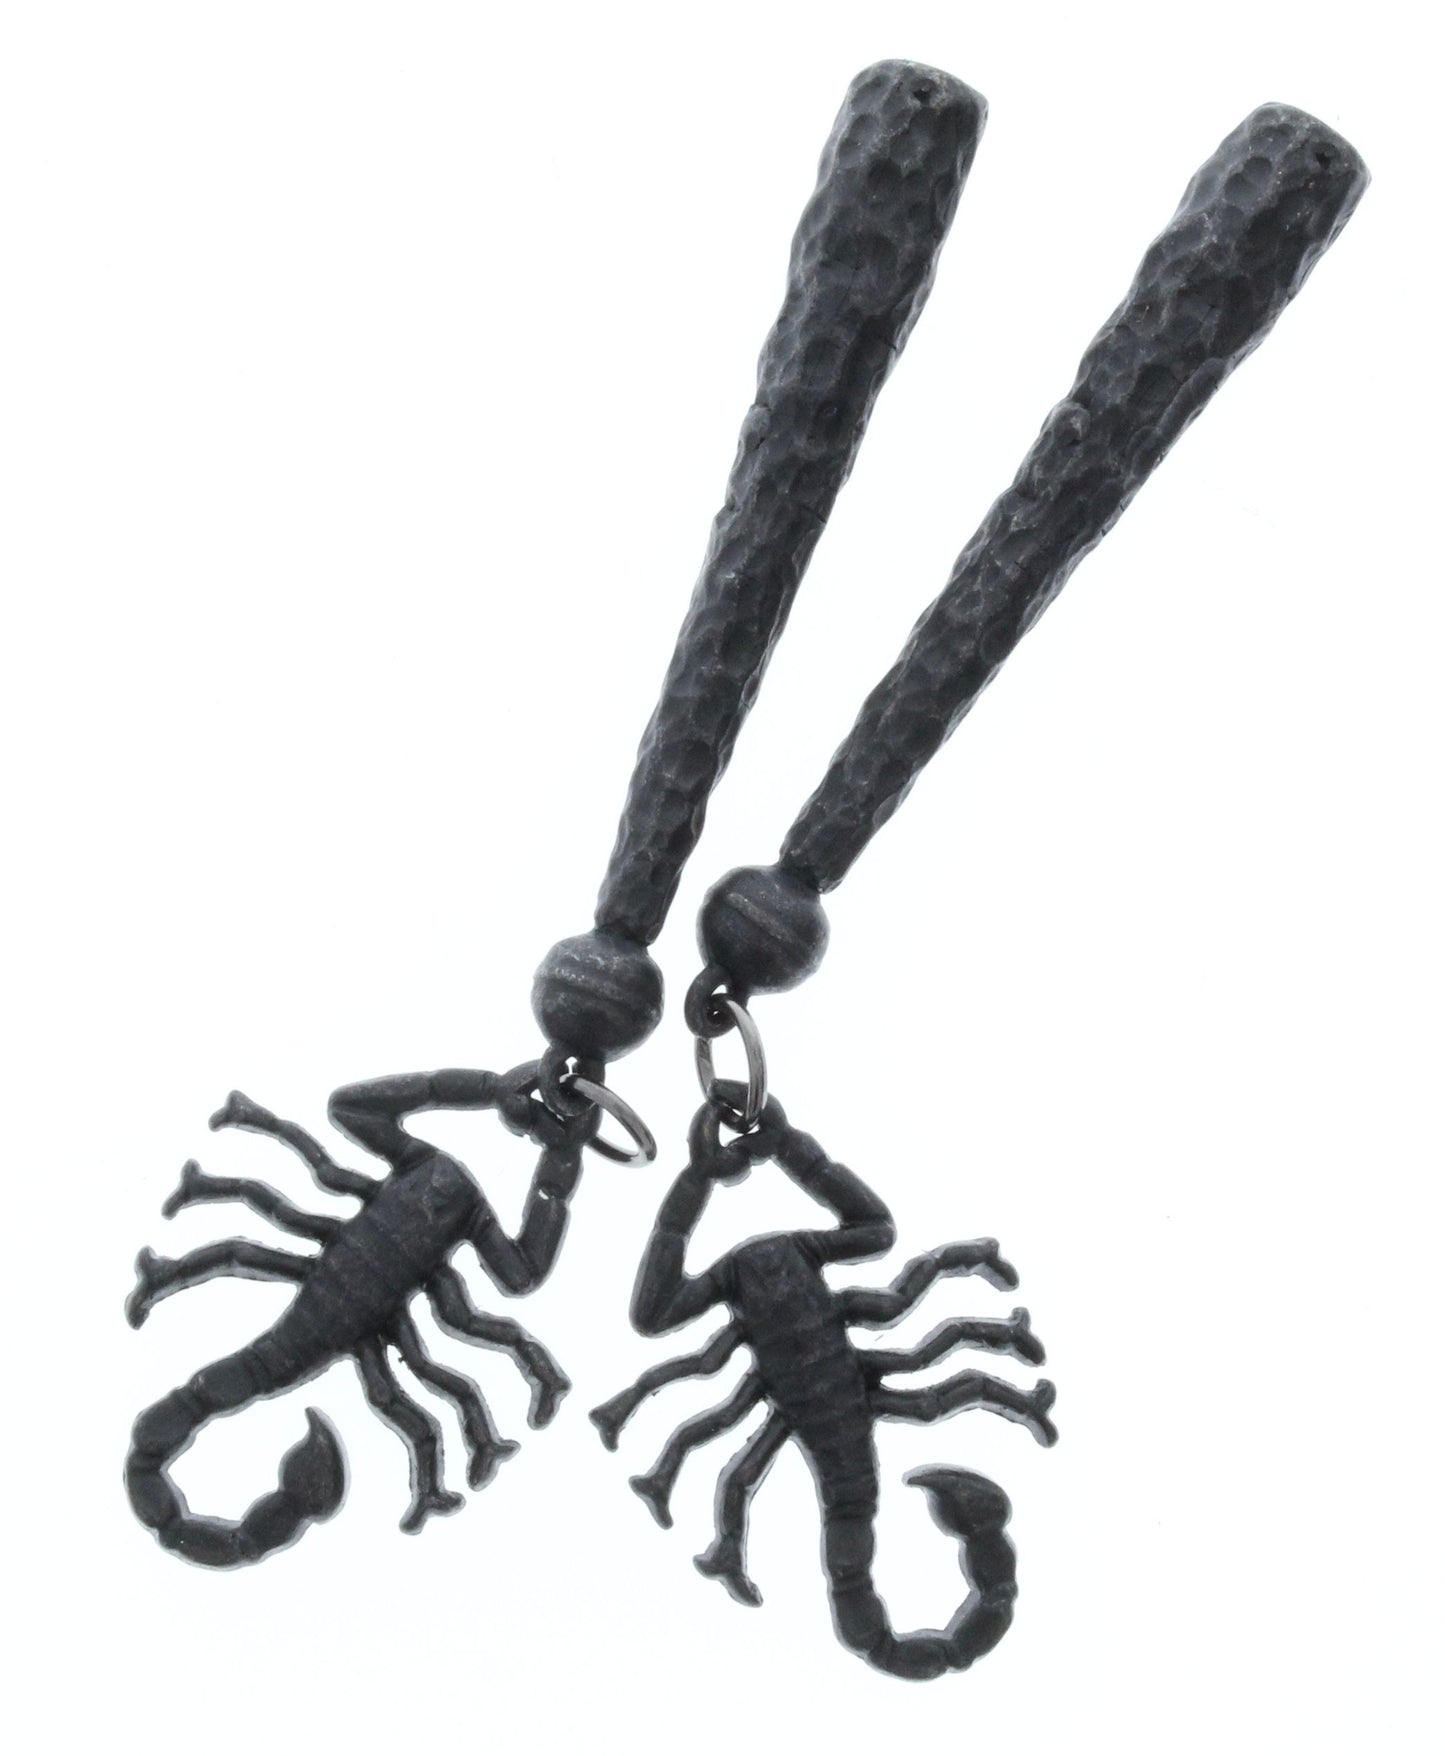 scorpion  charm  Bolo Tips, black finish   , Made in USA of zinc, Set of 2